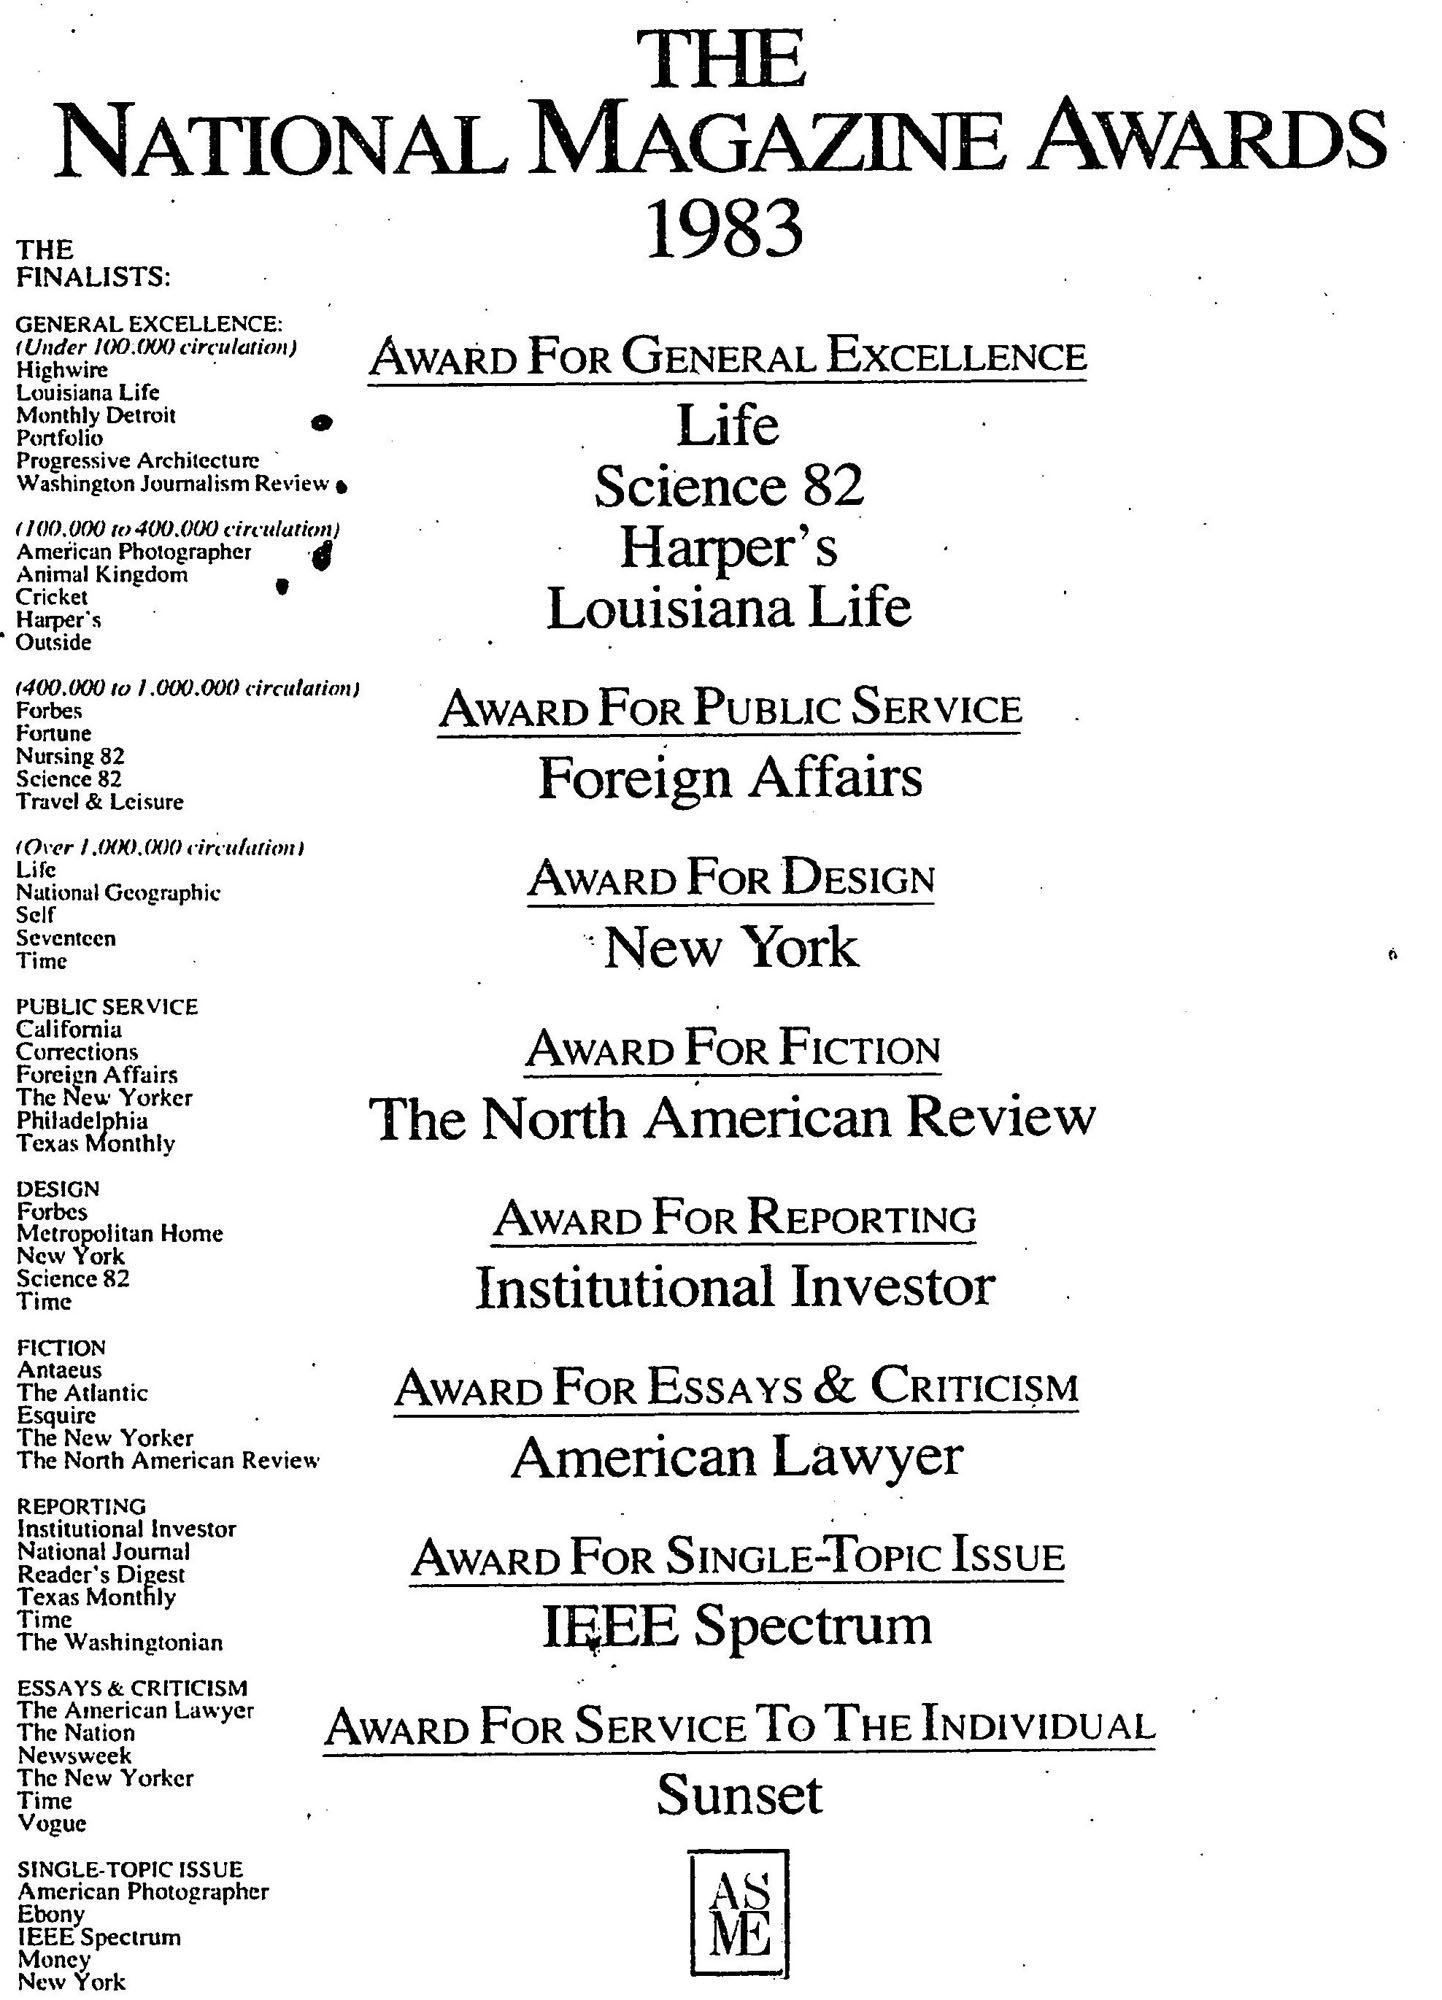 <span class='italics'>Foreign Affairs</span> wins the National Magazine Award for public service